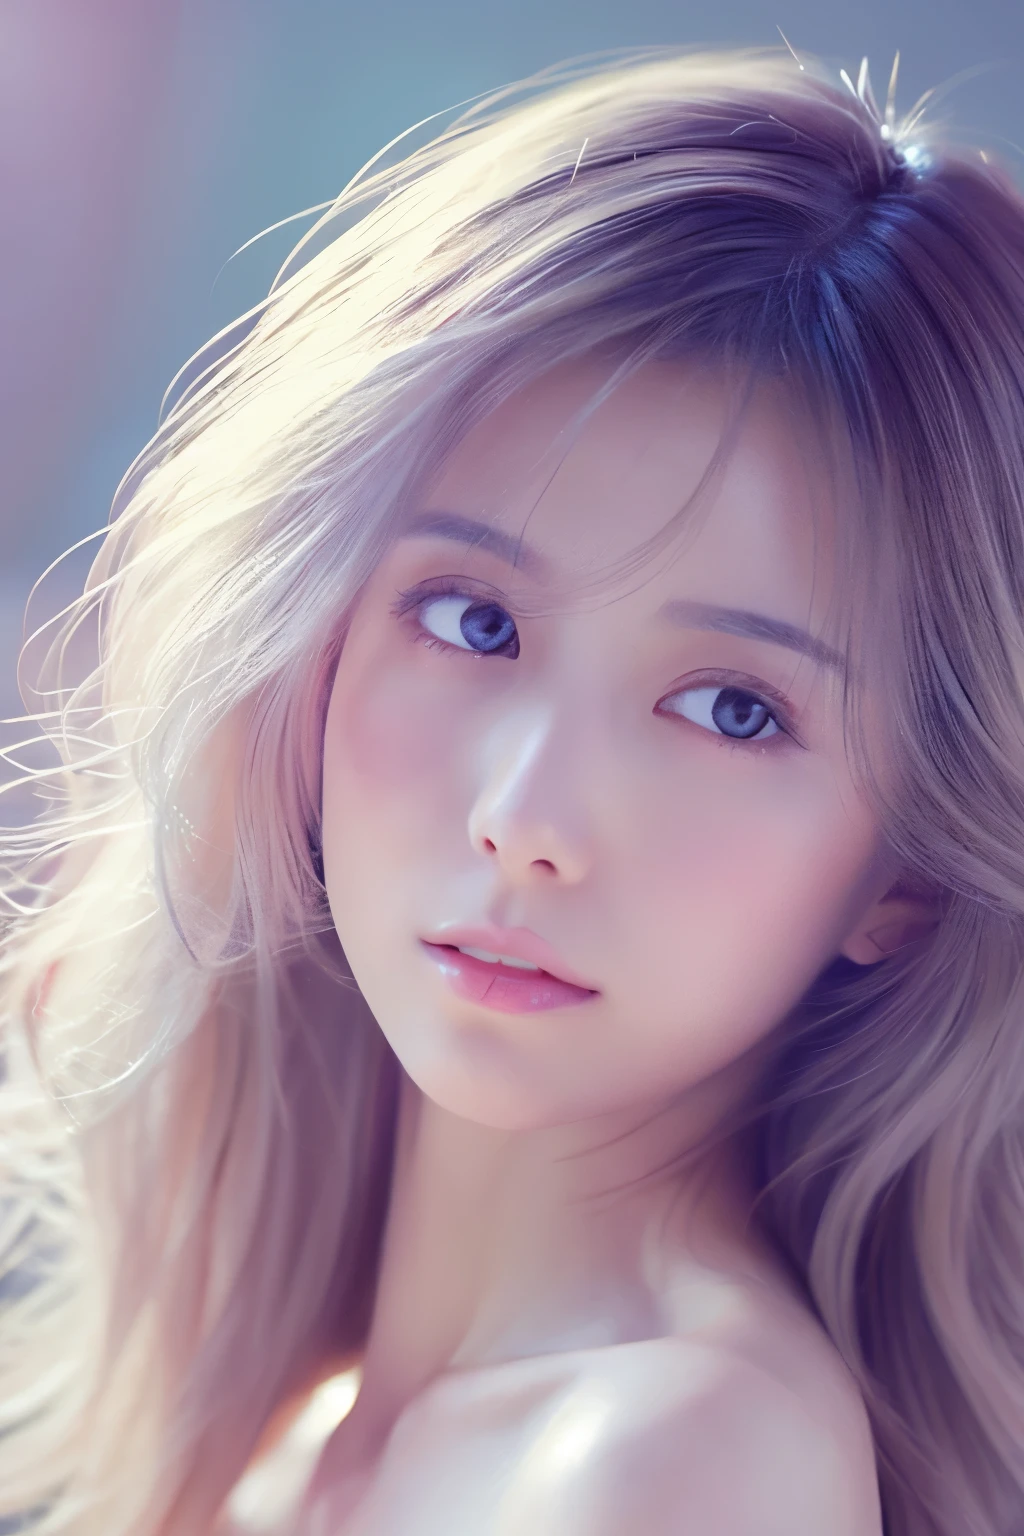 Skinny Japanese lady, soft color palette, beautiful lady, shy expression, illustration, (best quality, ultra-detailed), pastel tones, gentle lighting, flowing hair, delicate features, dreamy atmosphere